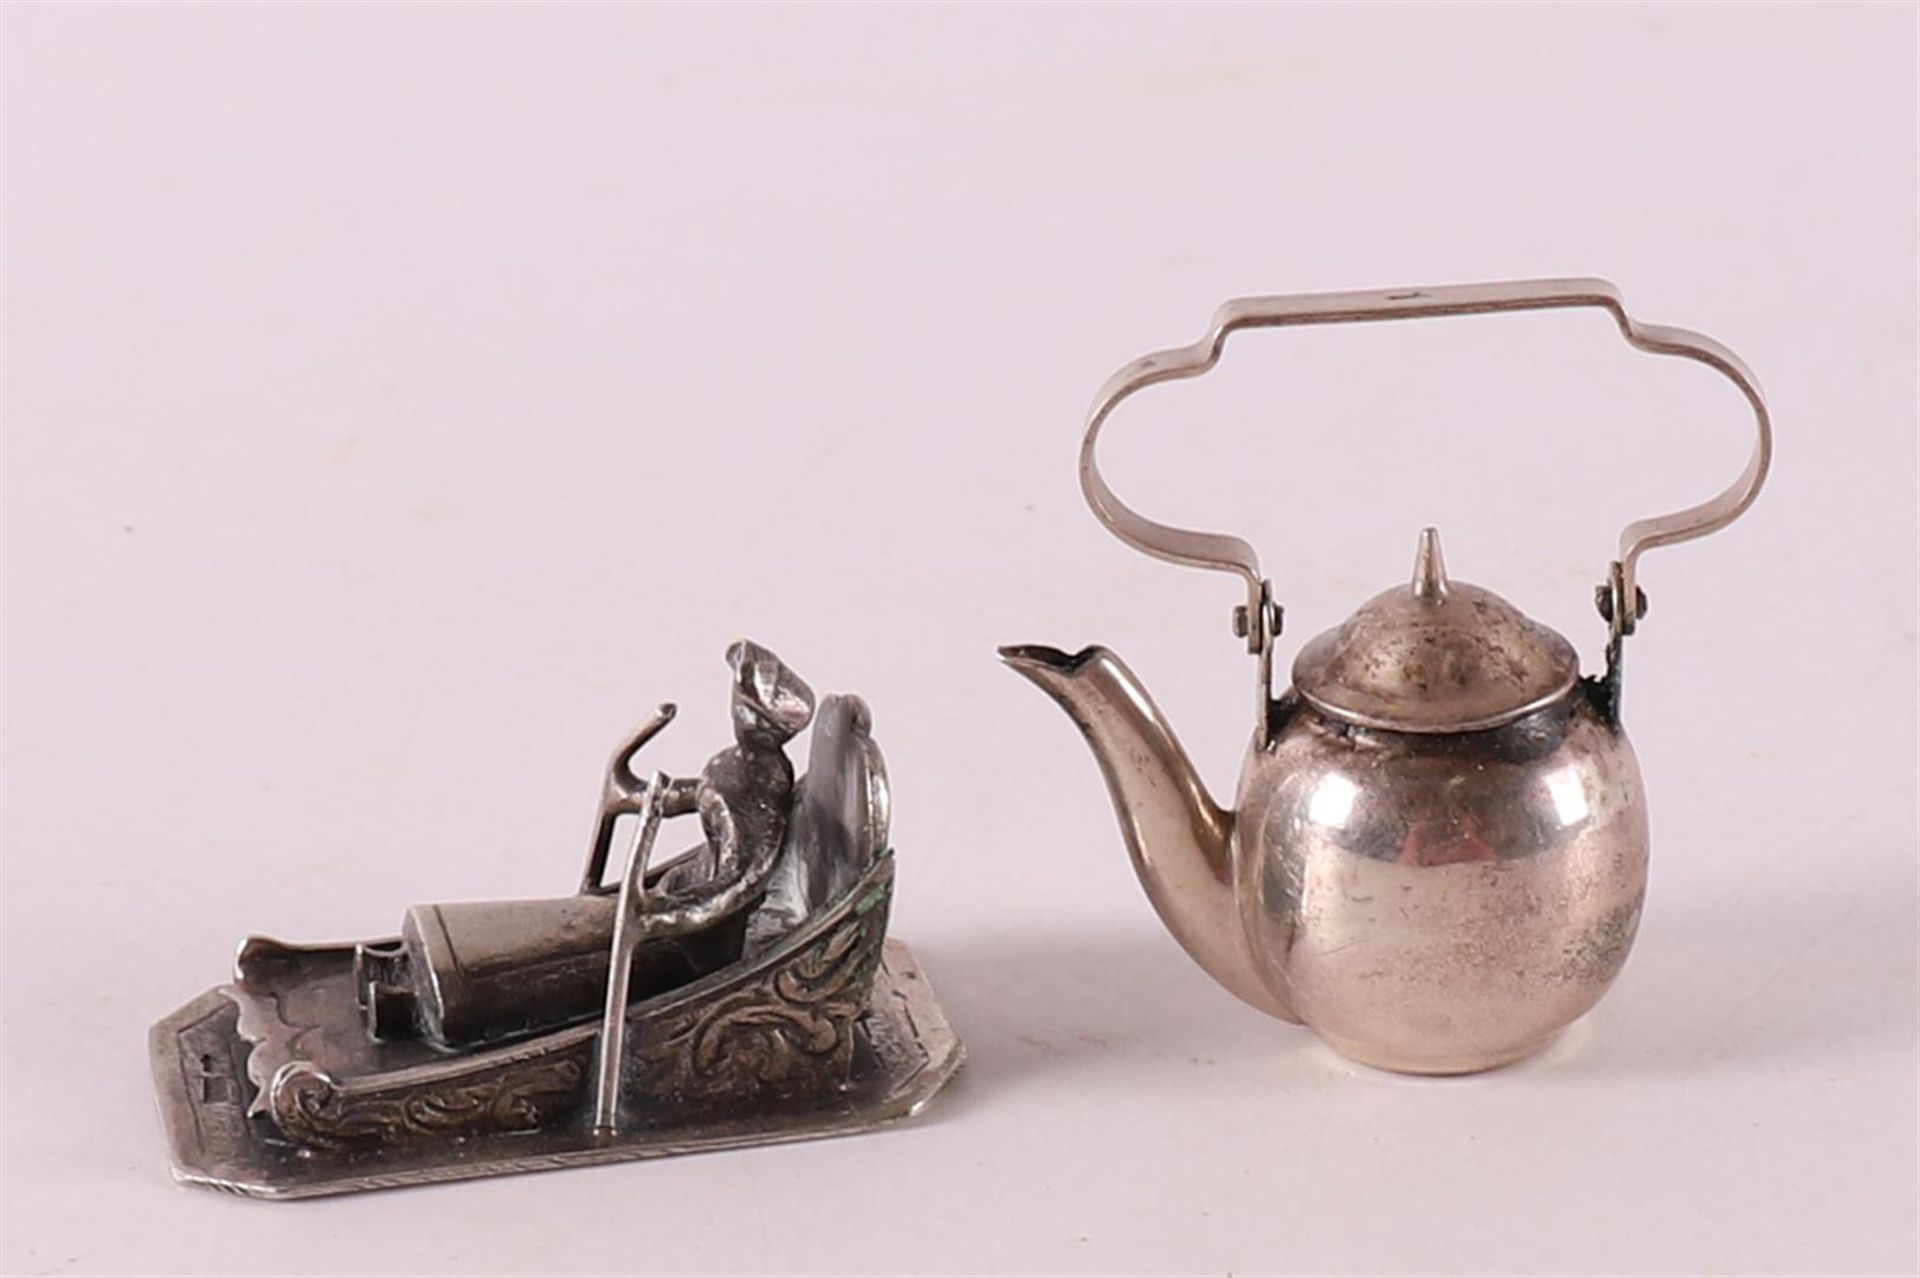 Etagere silver. A kettle and a figure on a spiked carriage, 20th century, tot. 2x.